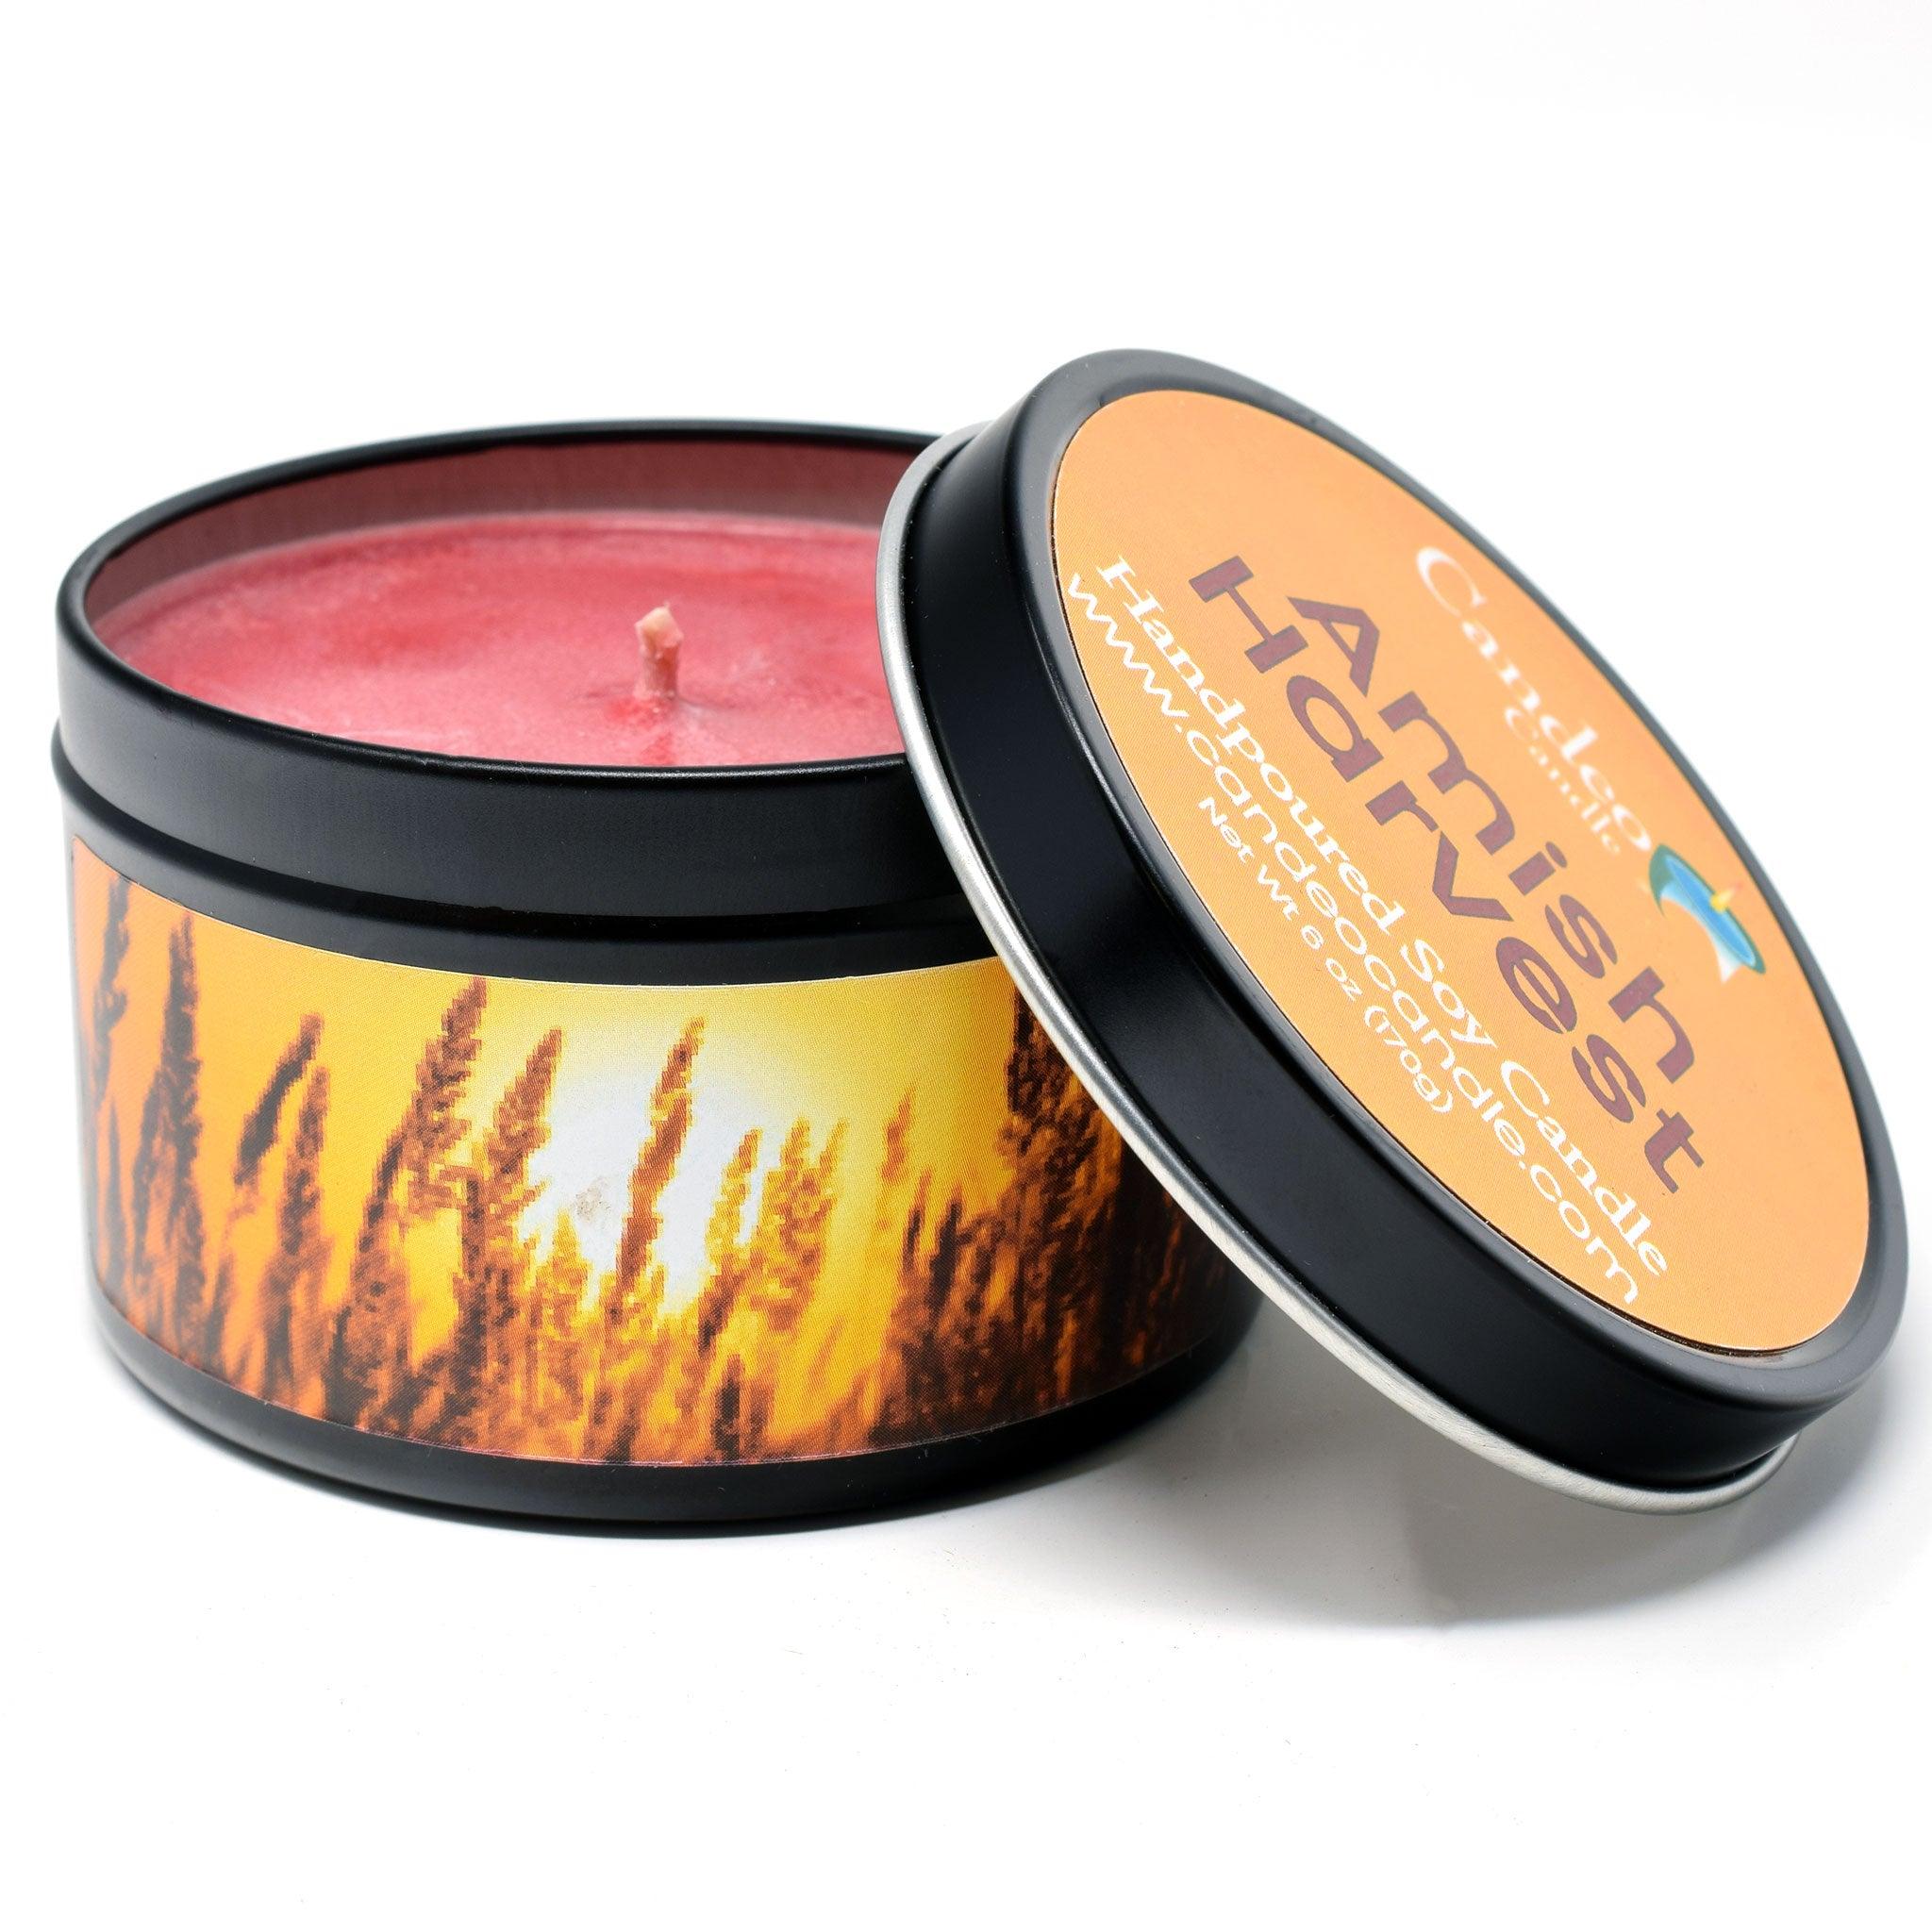 Amish Harvest, 6oz Soy Candle Tin - Candeo Candle